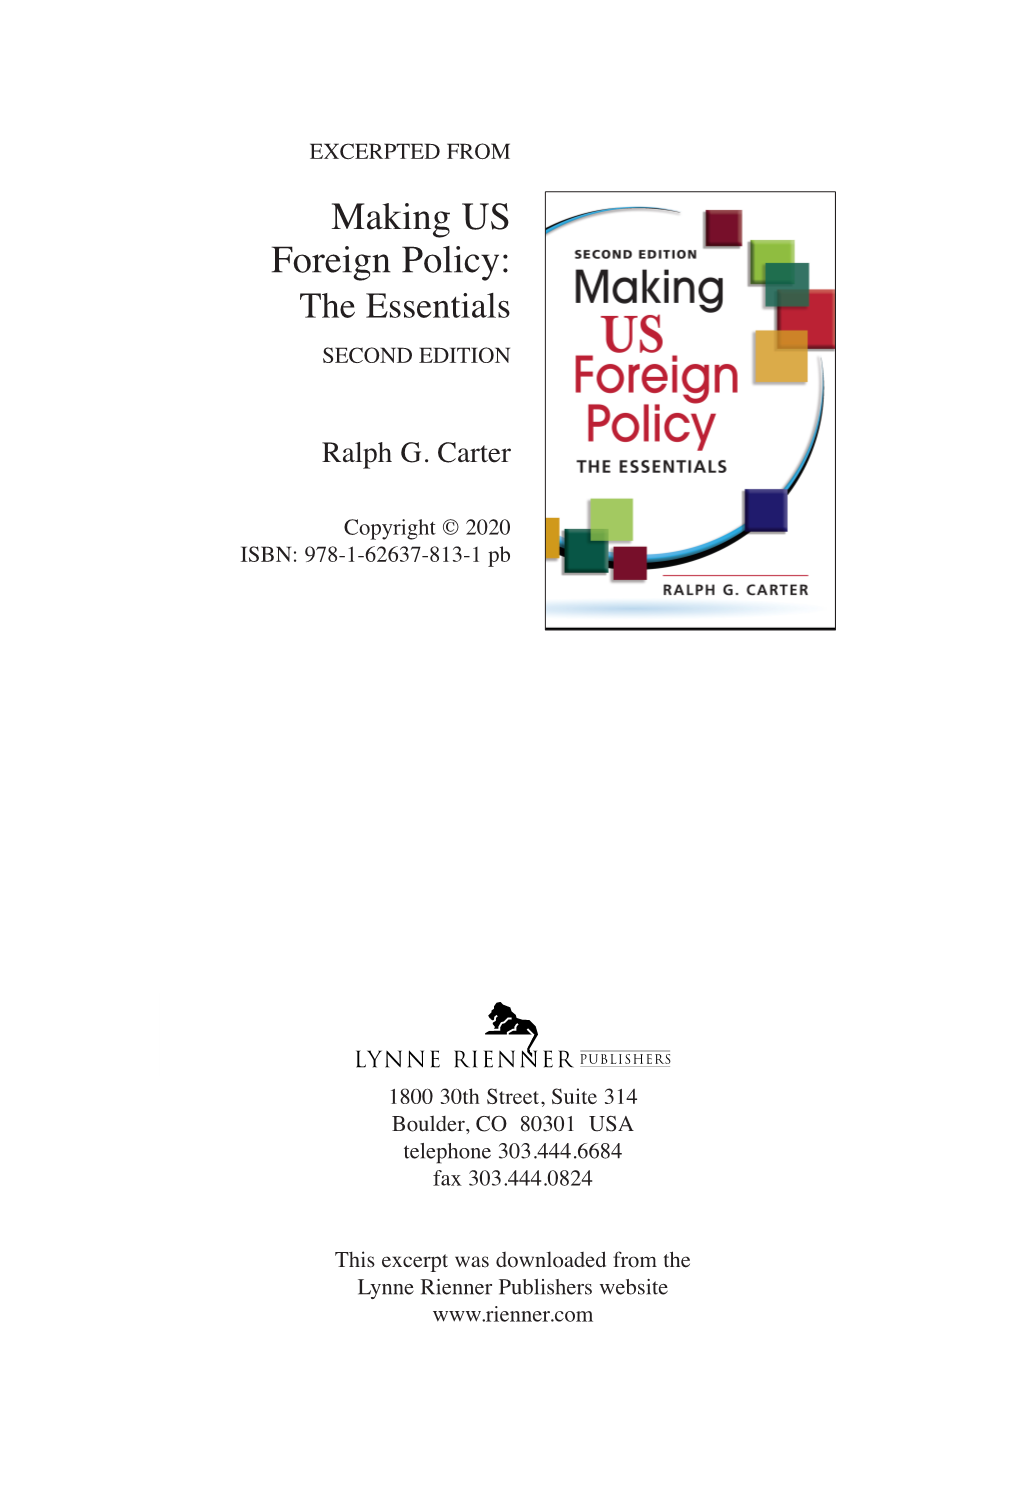 Making US Foreign Policy: the Essentials SECOND EDITION